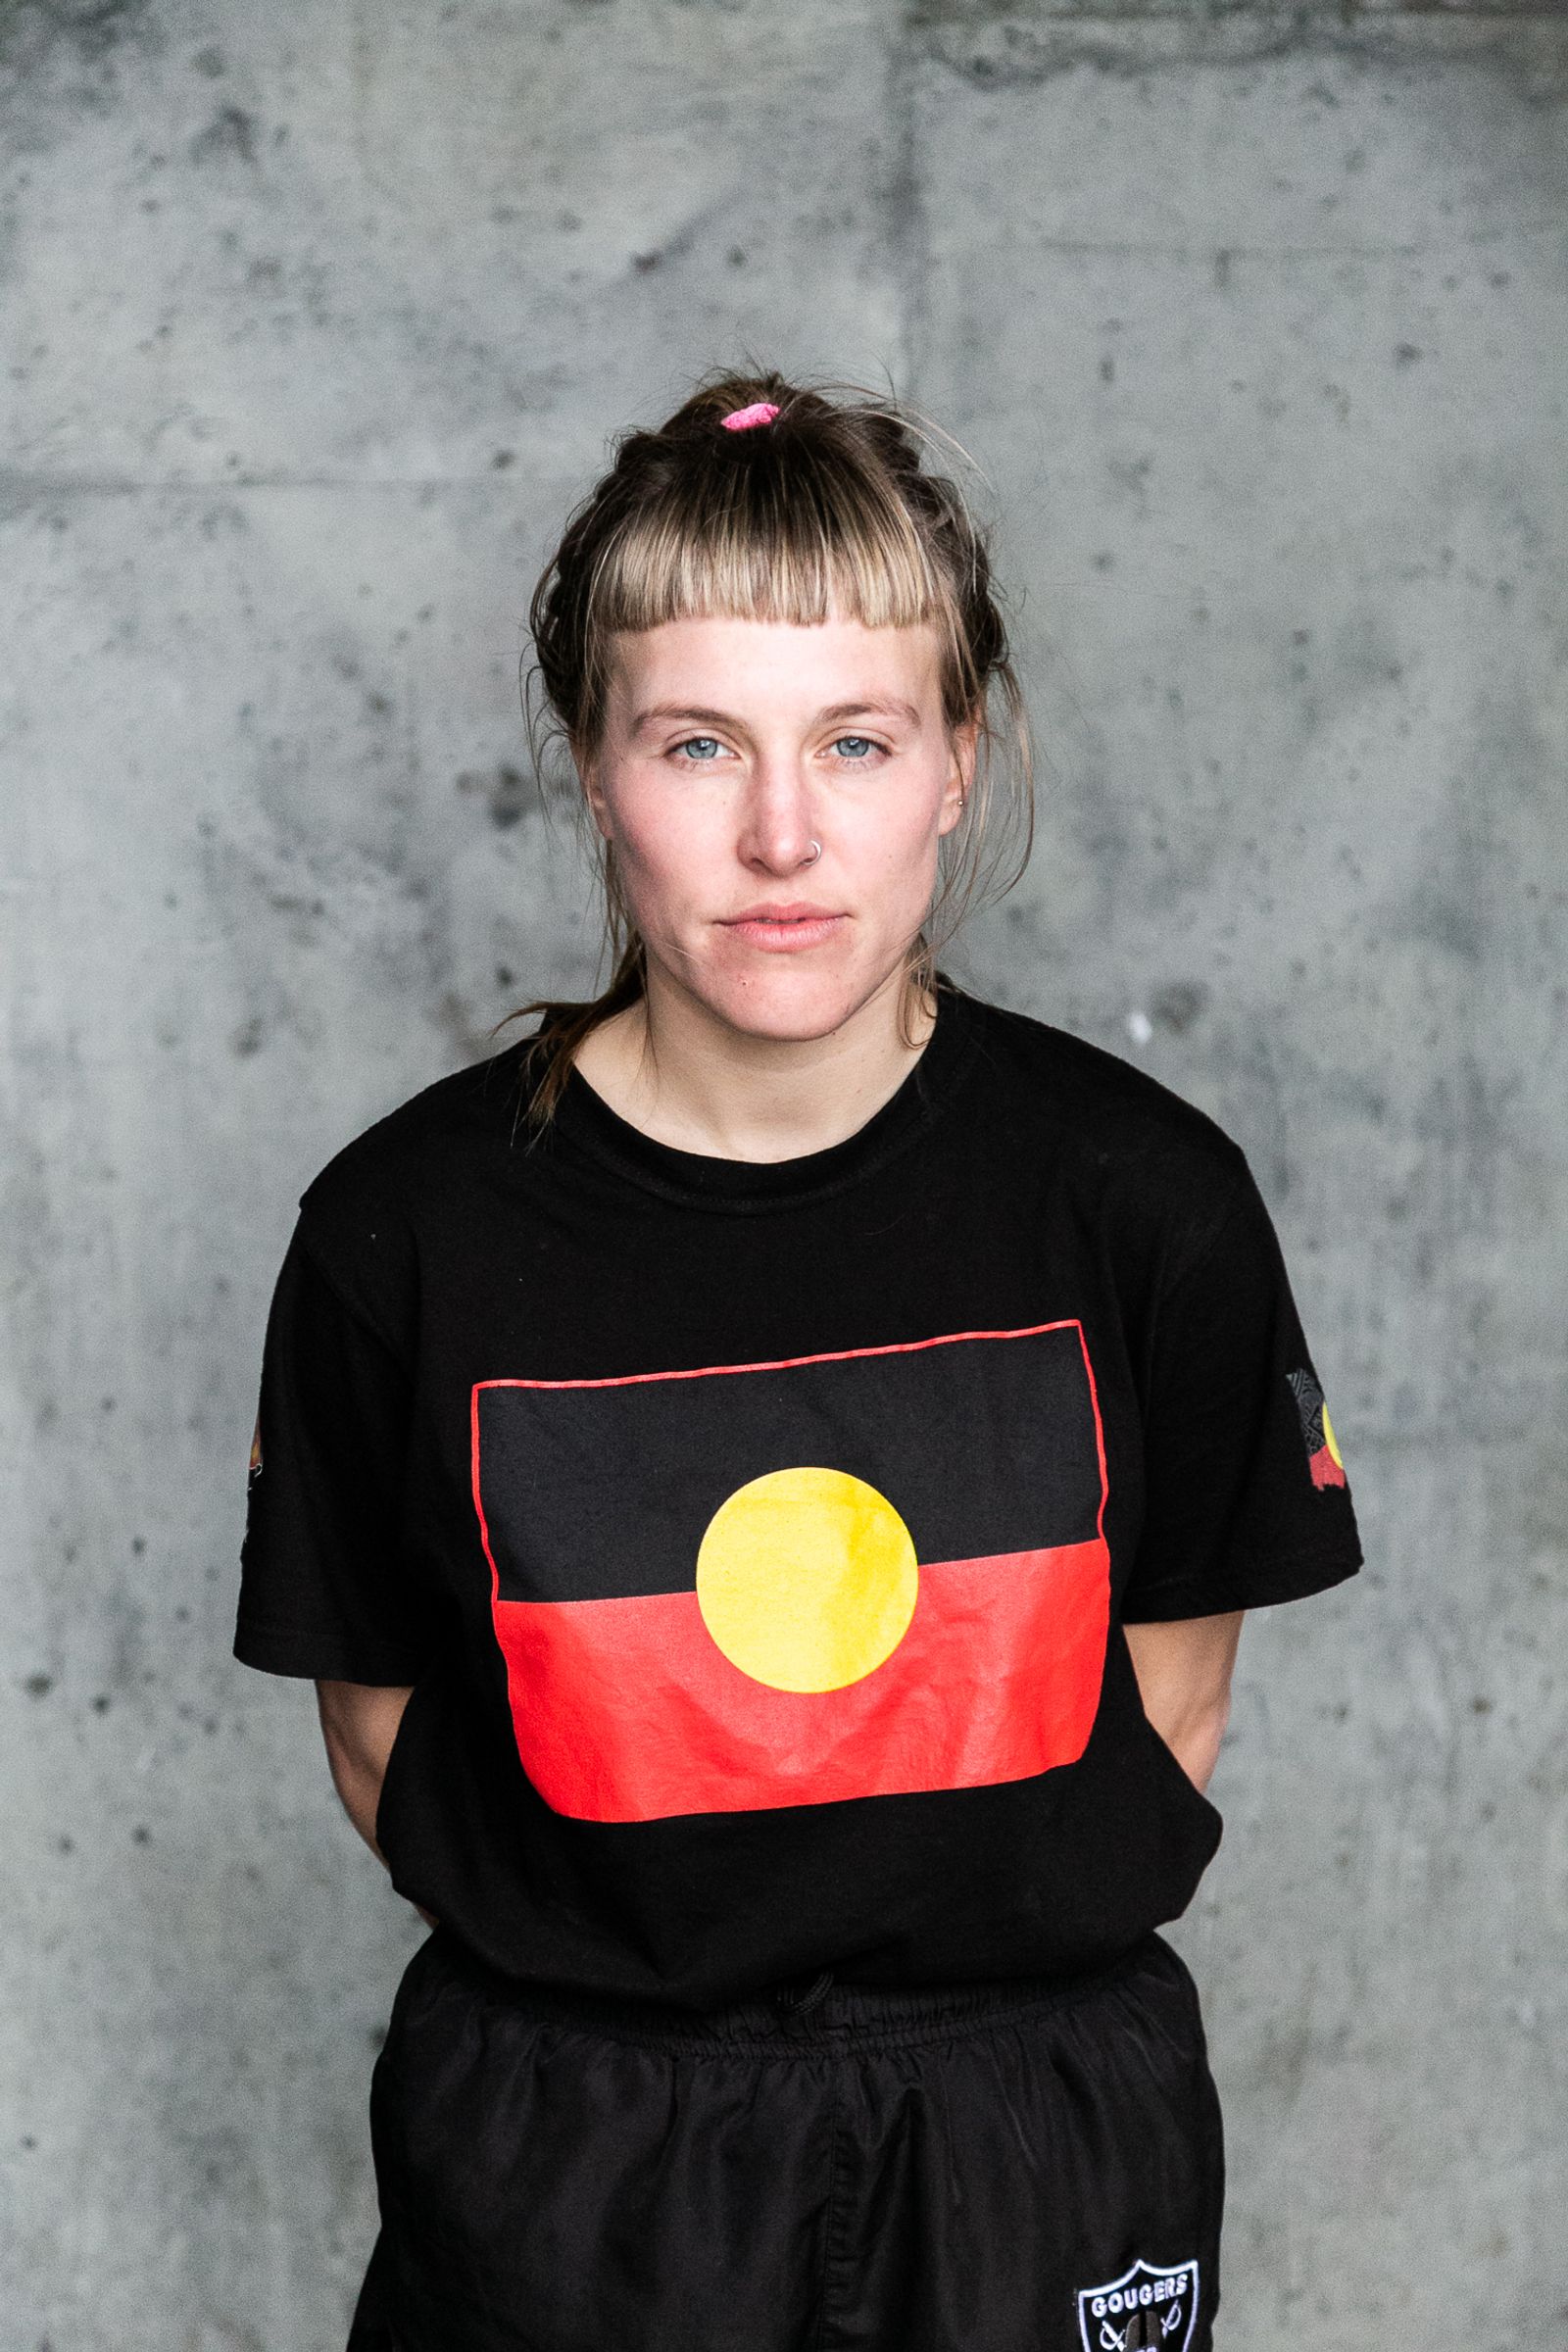 © J Forsyth - Player posed for footy card photo wearing an Indigenous flag t-shirt